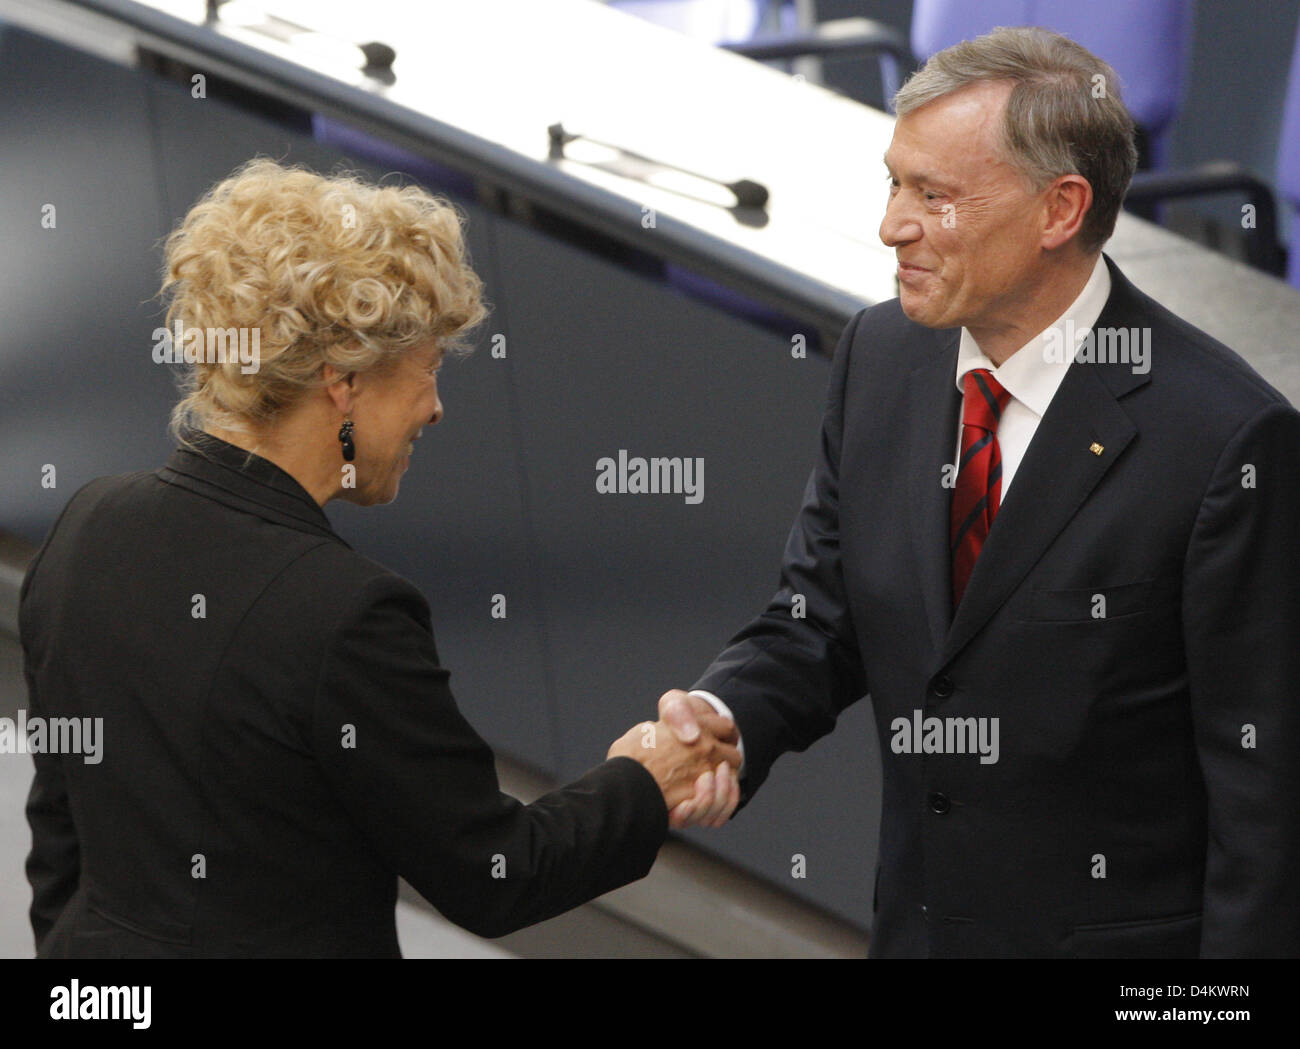 Candidate of the SPD Gesine Schwan congratulates Federal German President Horst Koehler on his reelection at the 13th Federal Convention in the plenar hall of the Reichstag building in Berlin, Germany, 23 May 2009. Koehler won the election with 613 votes, the minimum number of necessary votes. Photo: Bernd Settnik Stock Photo